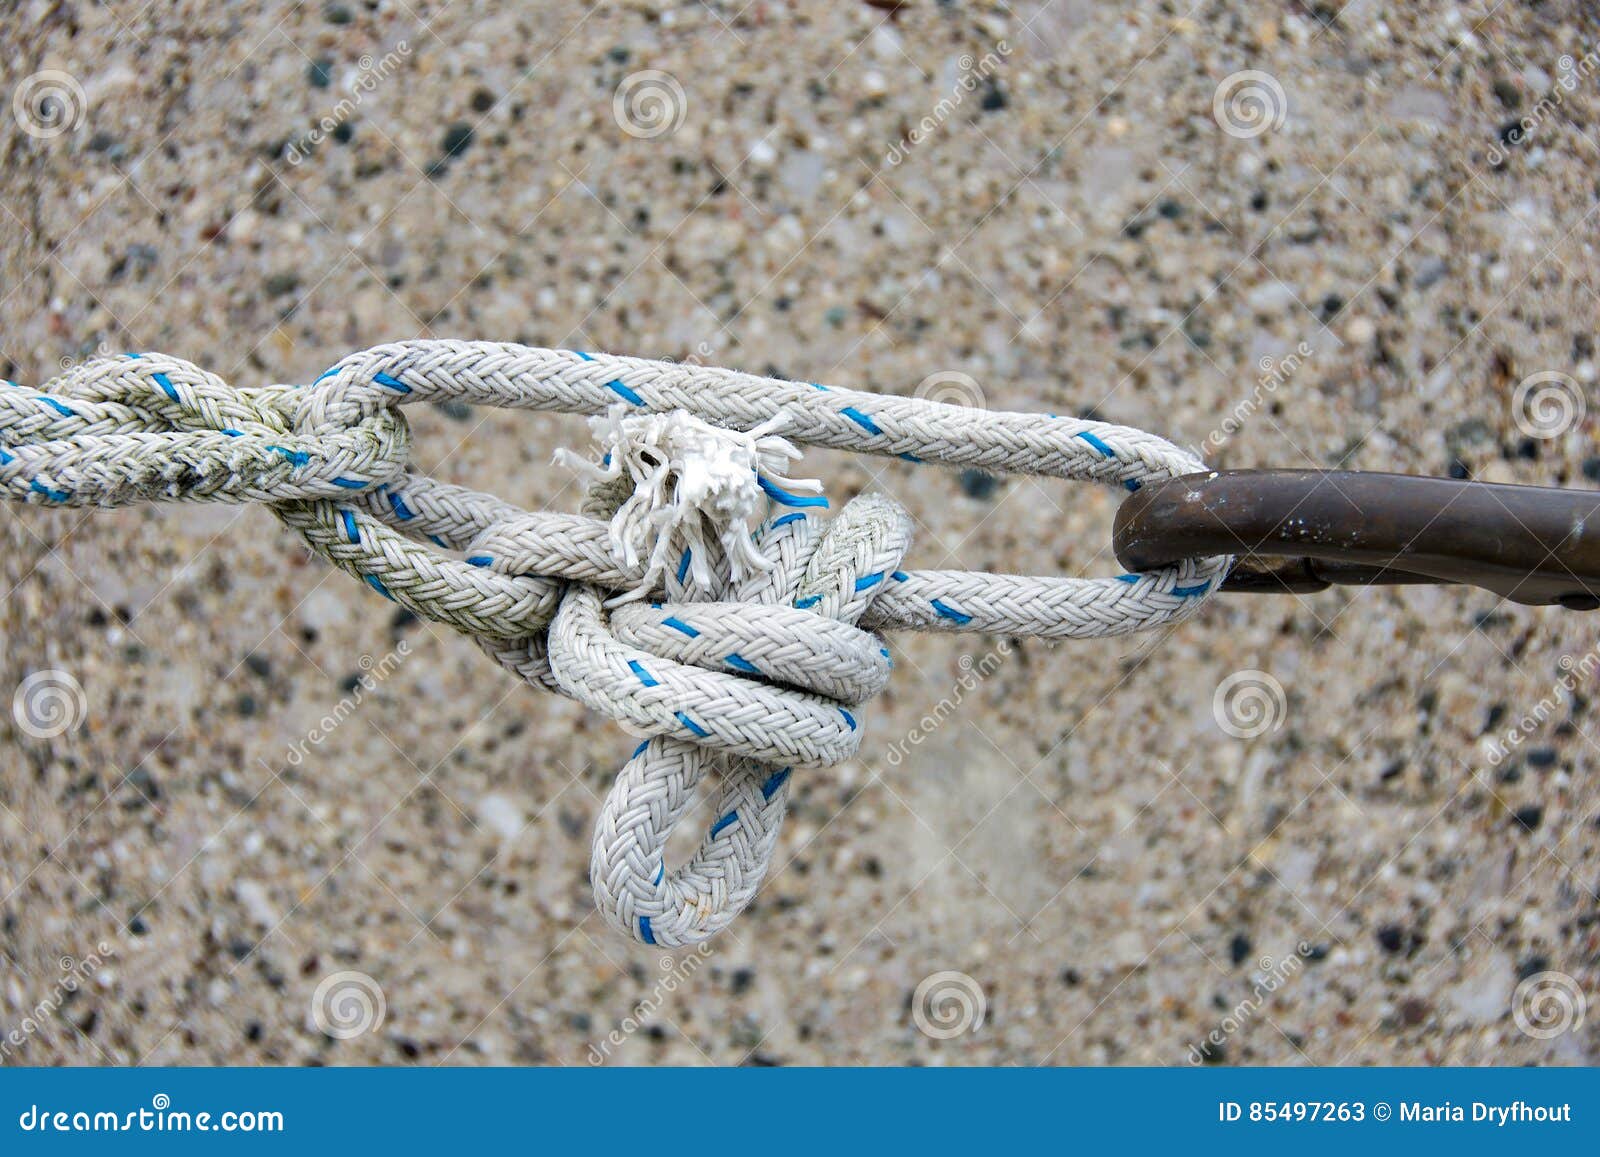 Tight Knot with Frayed Rope Stock Image - Image of tight, frayed: 85497263